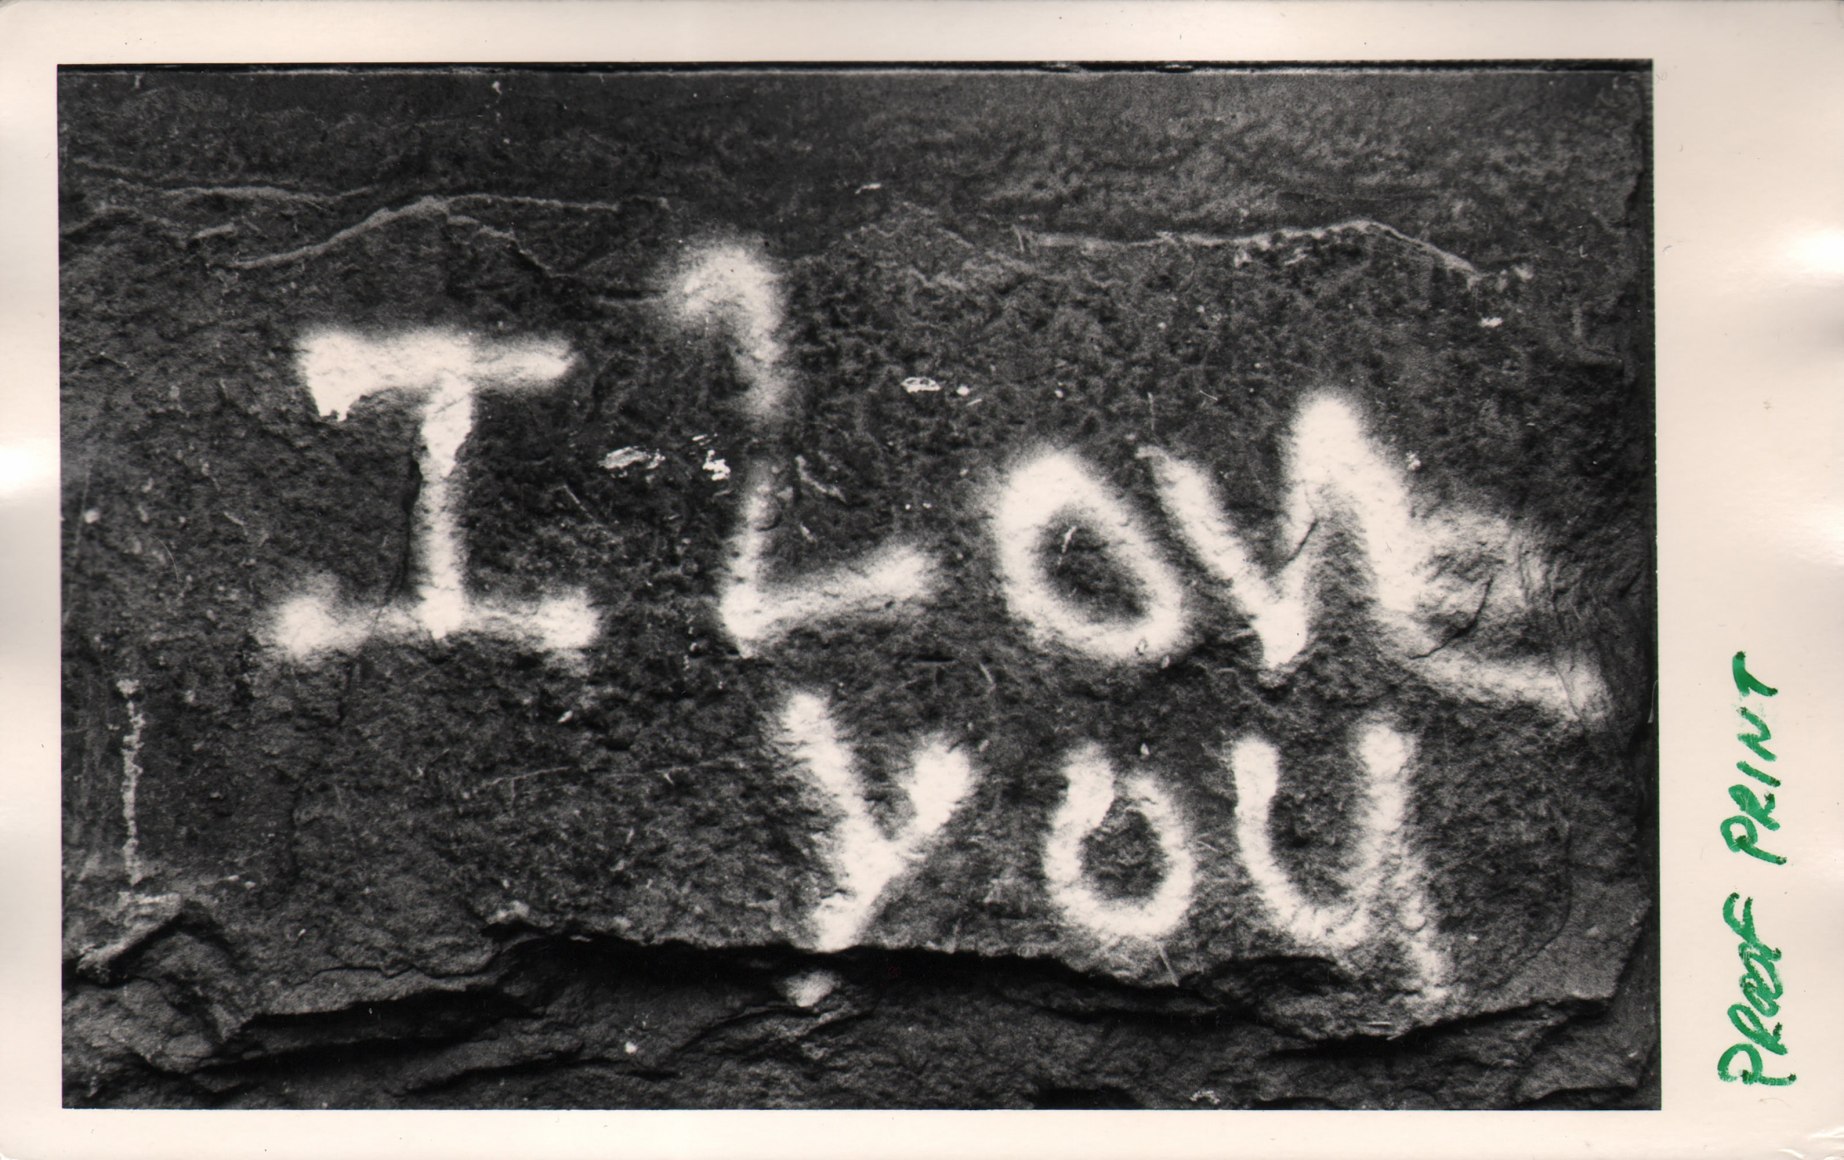 52. Beuford Smith, Love, NYC, ​1975. &quot;I love you&quot; written in white spray paint.